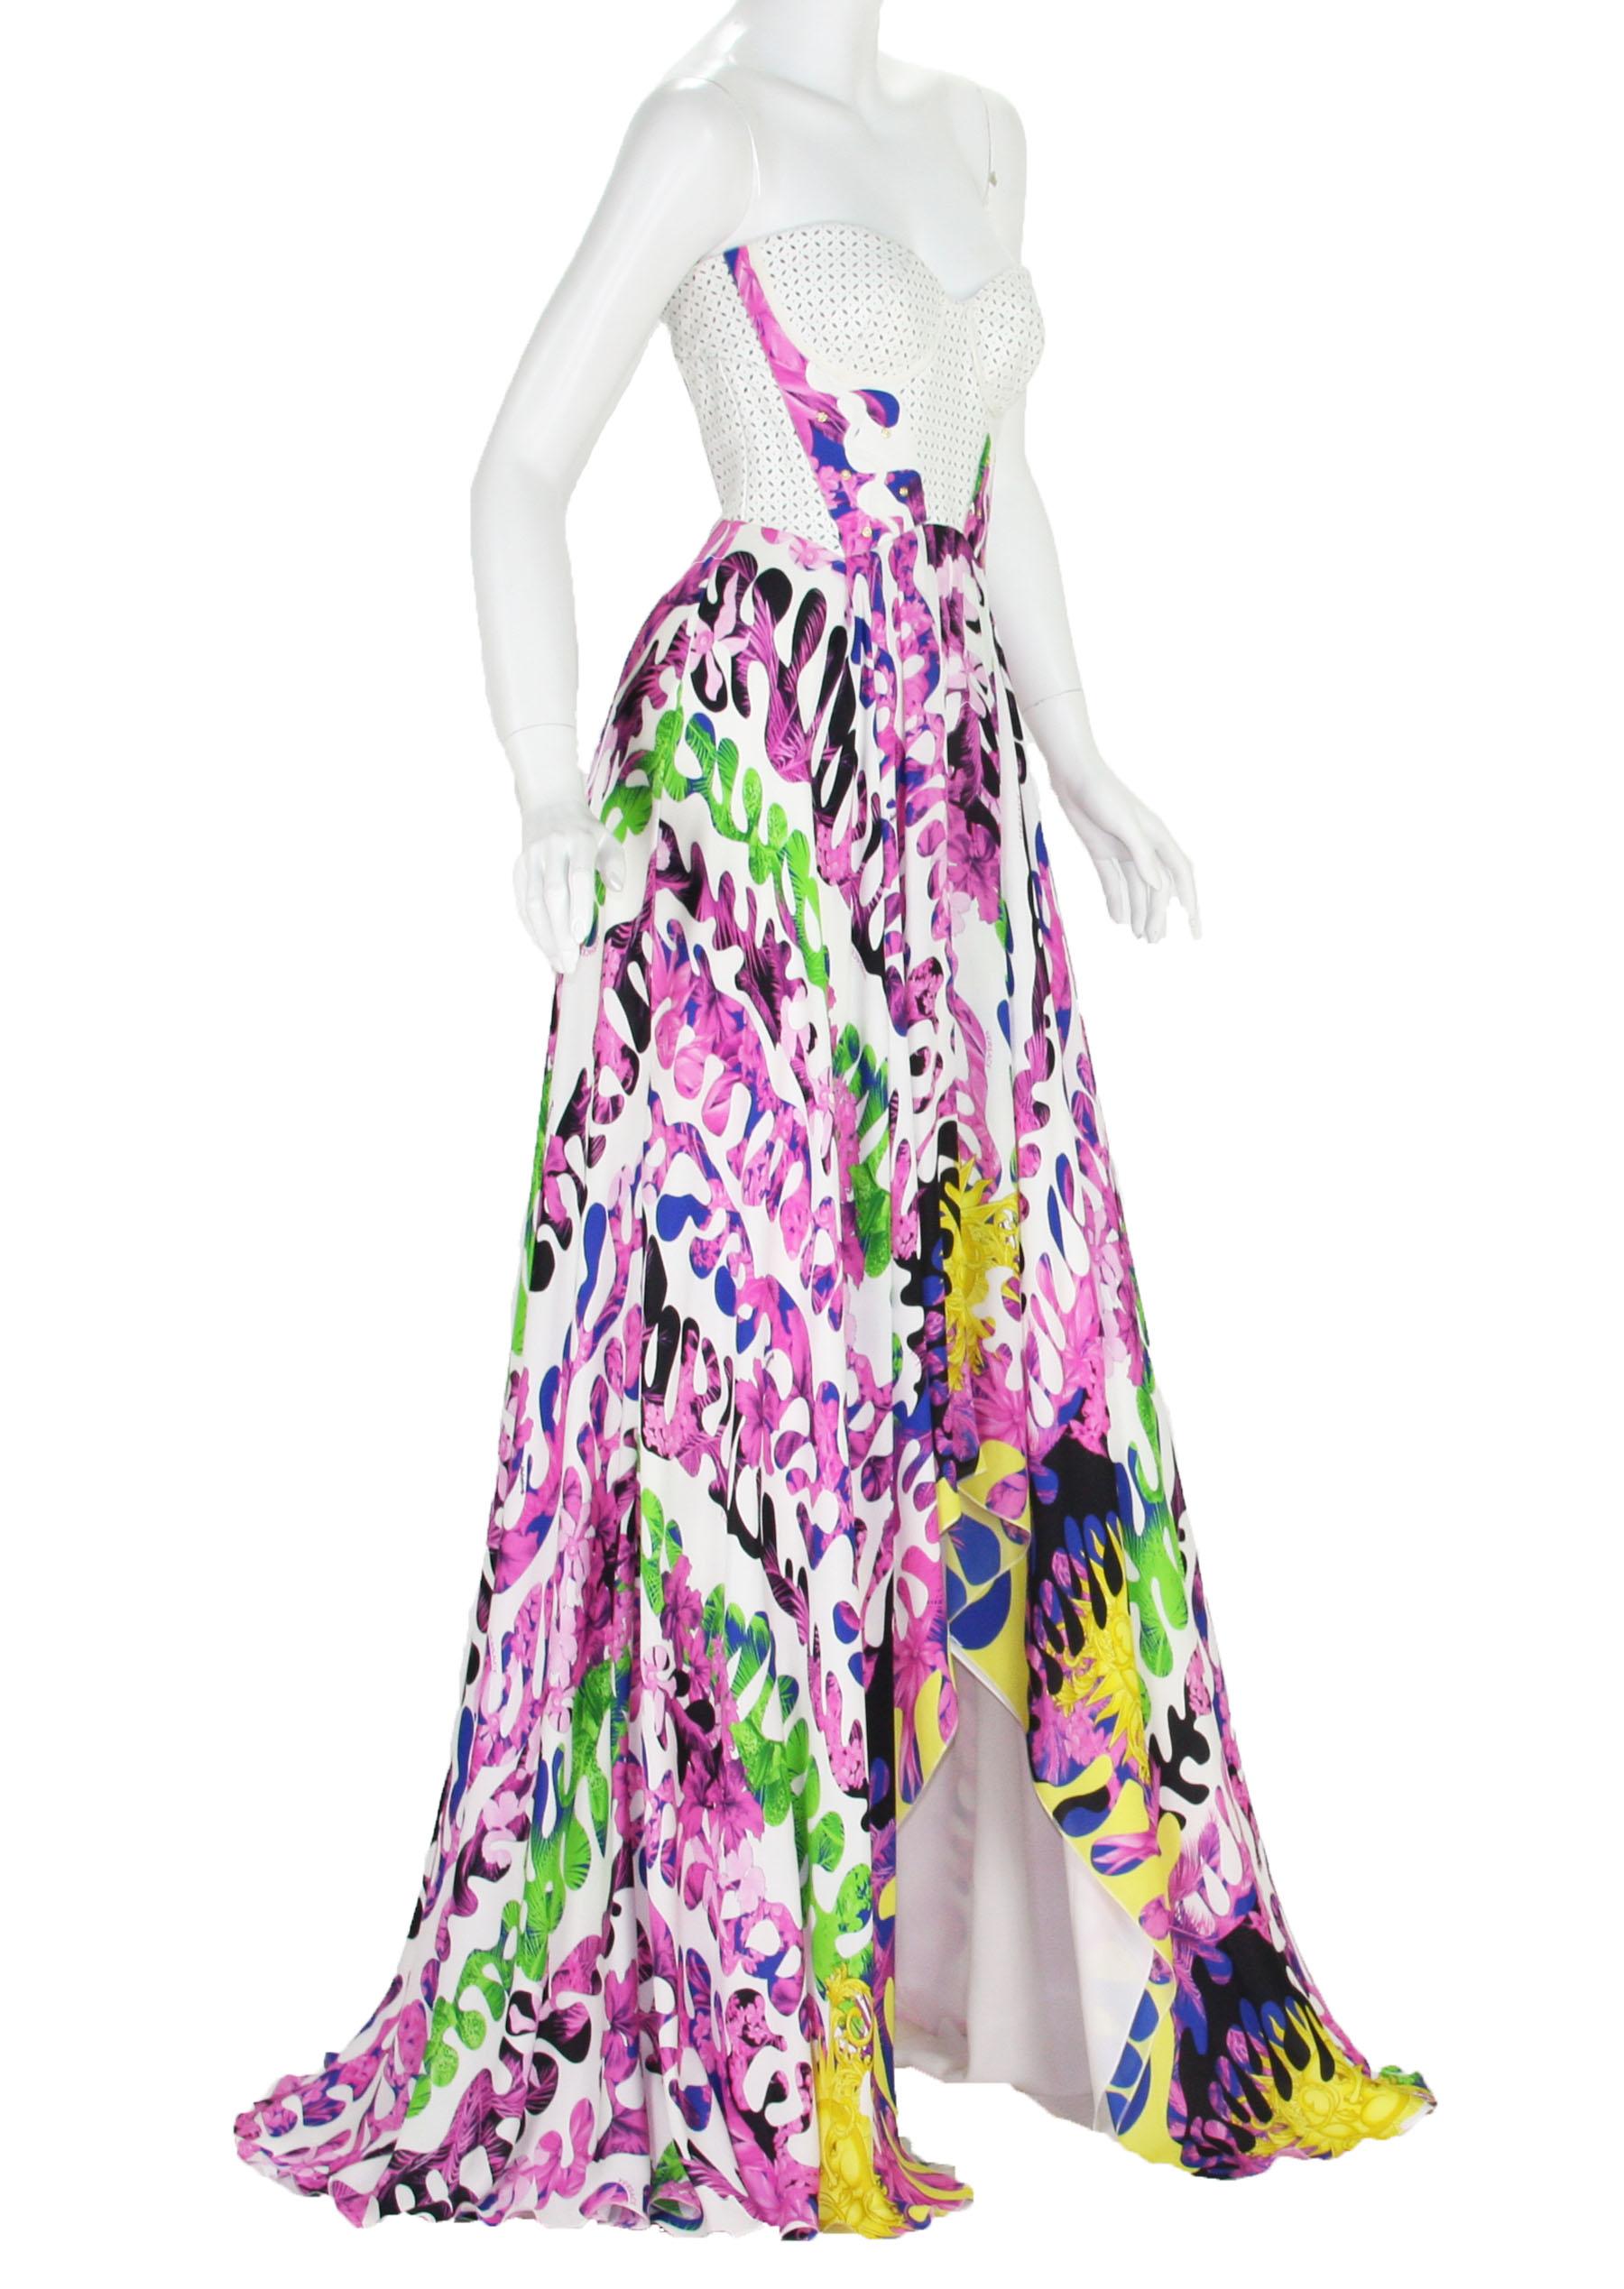 New Versace Printed Silk Dress Gown 
Designer size - 40 ( US 6)
100% Silk, White Leather Bustier with Laser-Cut Out Details, Fully Lined In Silk, Back Zip Closure.
Made in Italy
New with tag.
Retail $8,725.00
